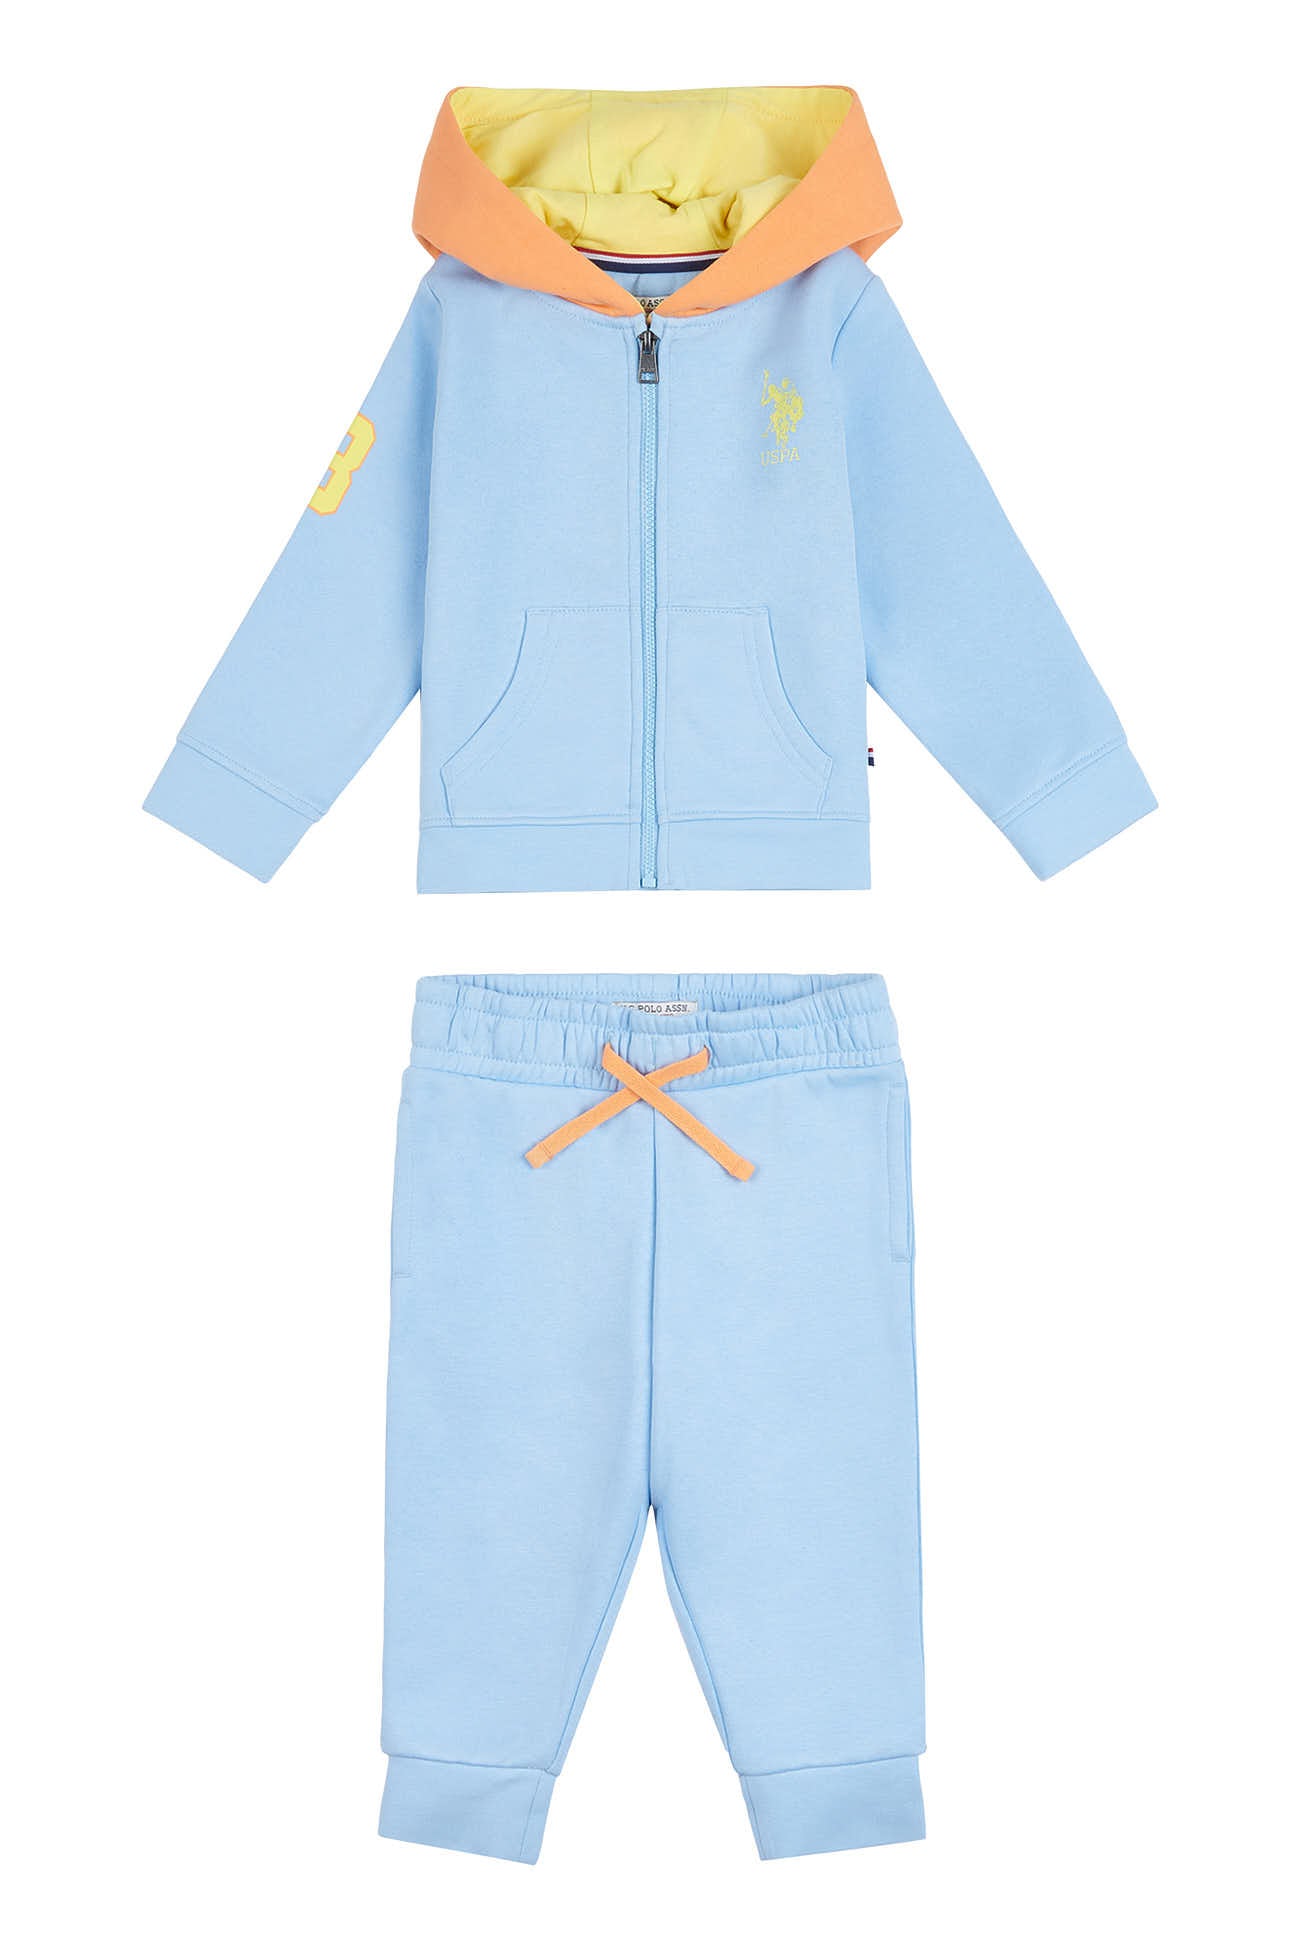 U.S. Polo Assn. Baby Player 3 Zip-Through Hoodie and Jogger Set in Blue Bell